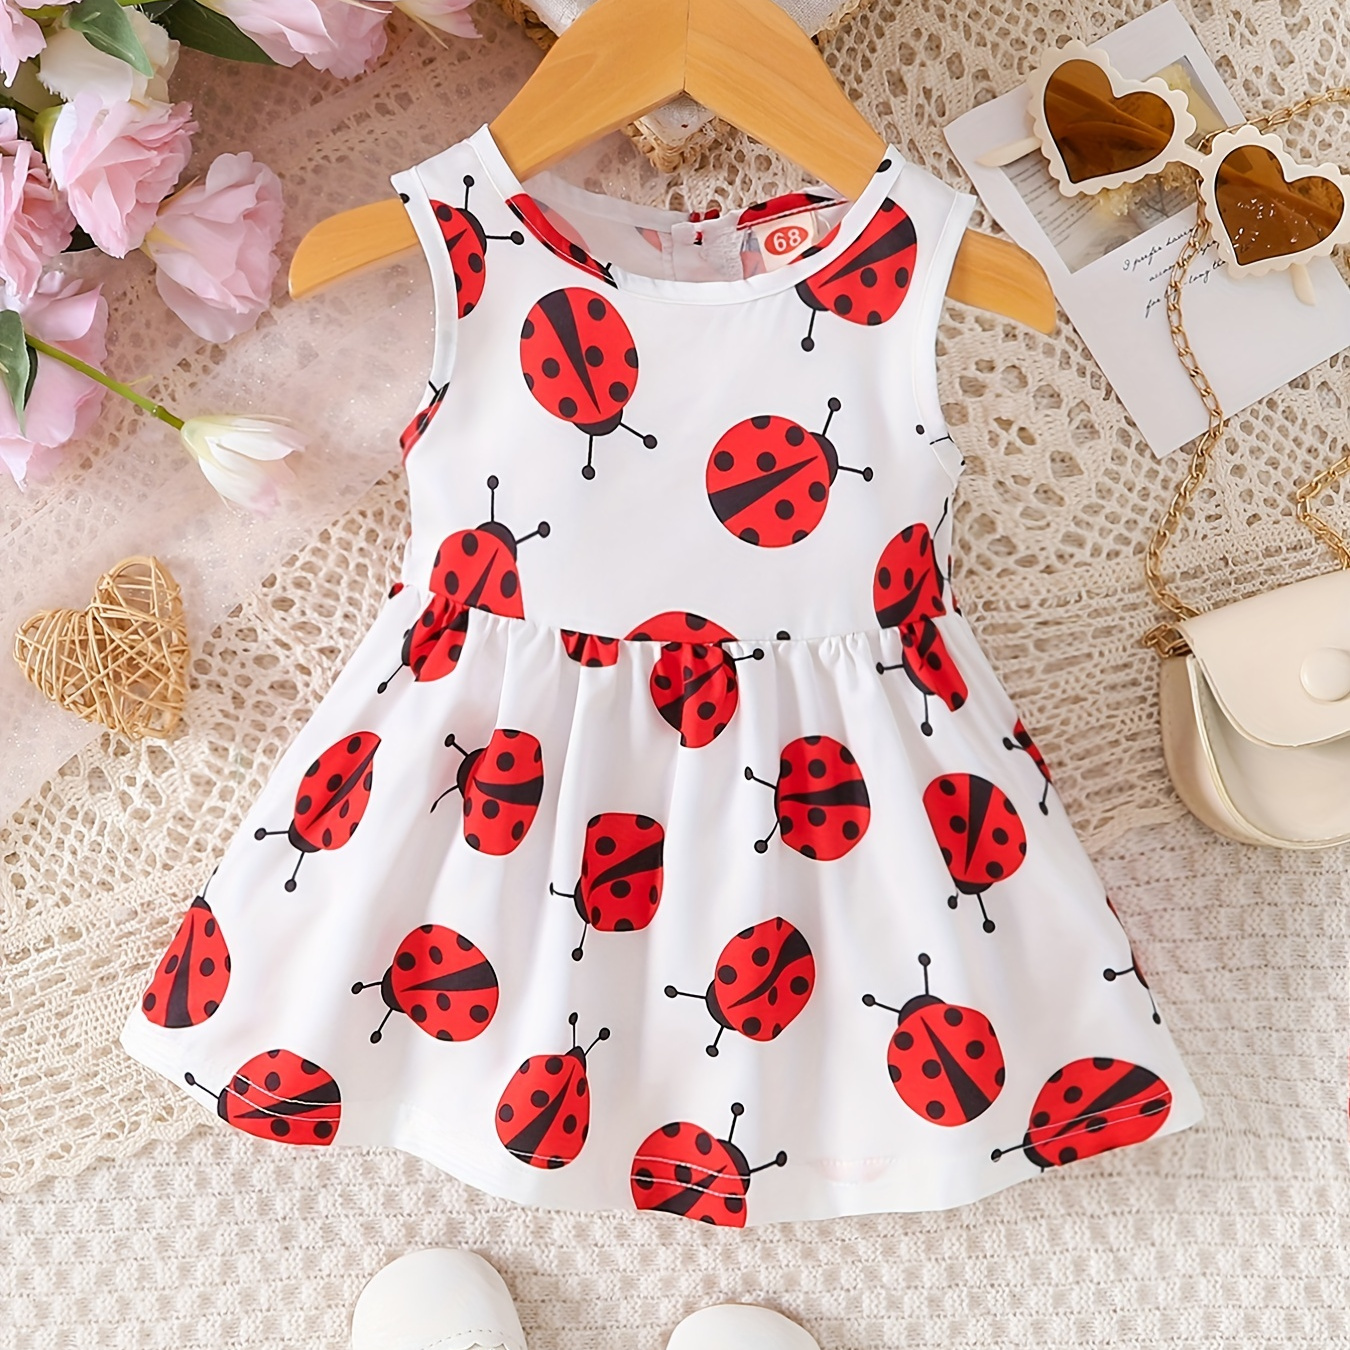 

Baby Cute Ladybug Print Sleeveless Dress, Child's Comfy Casual Clothes